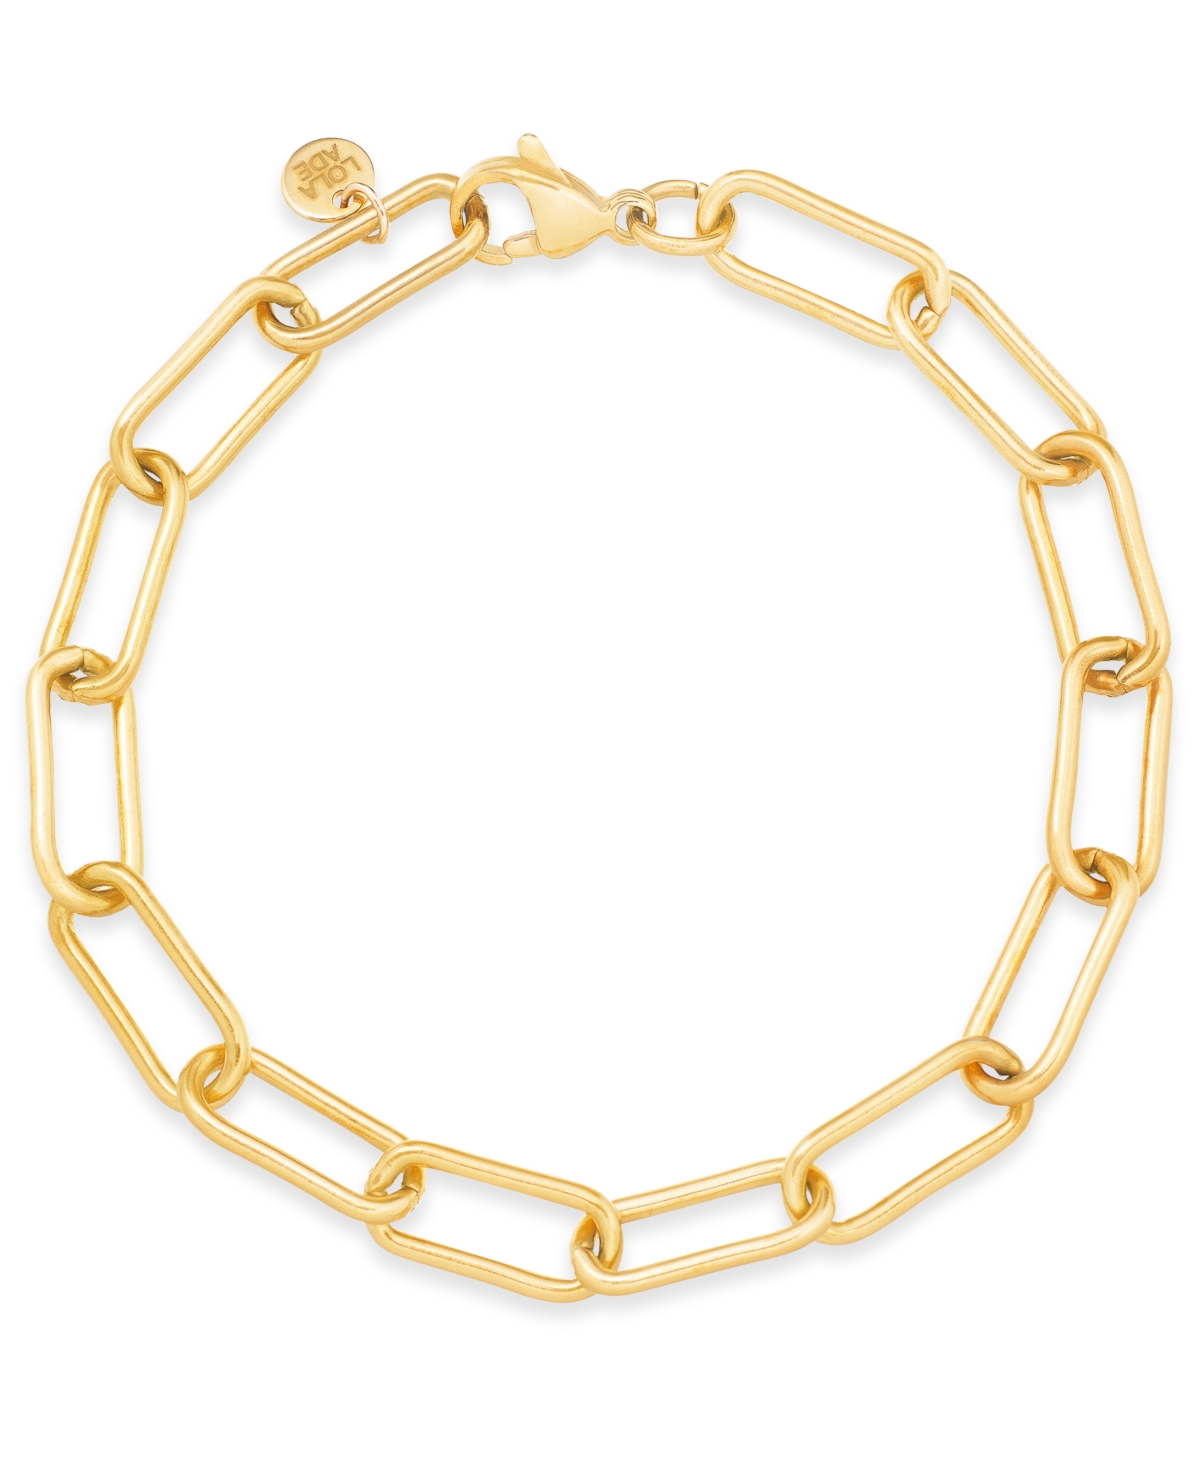 18k Gold-Plated Stainless Steel Paperclip Chain Link Bracelet - Gold